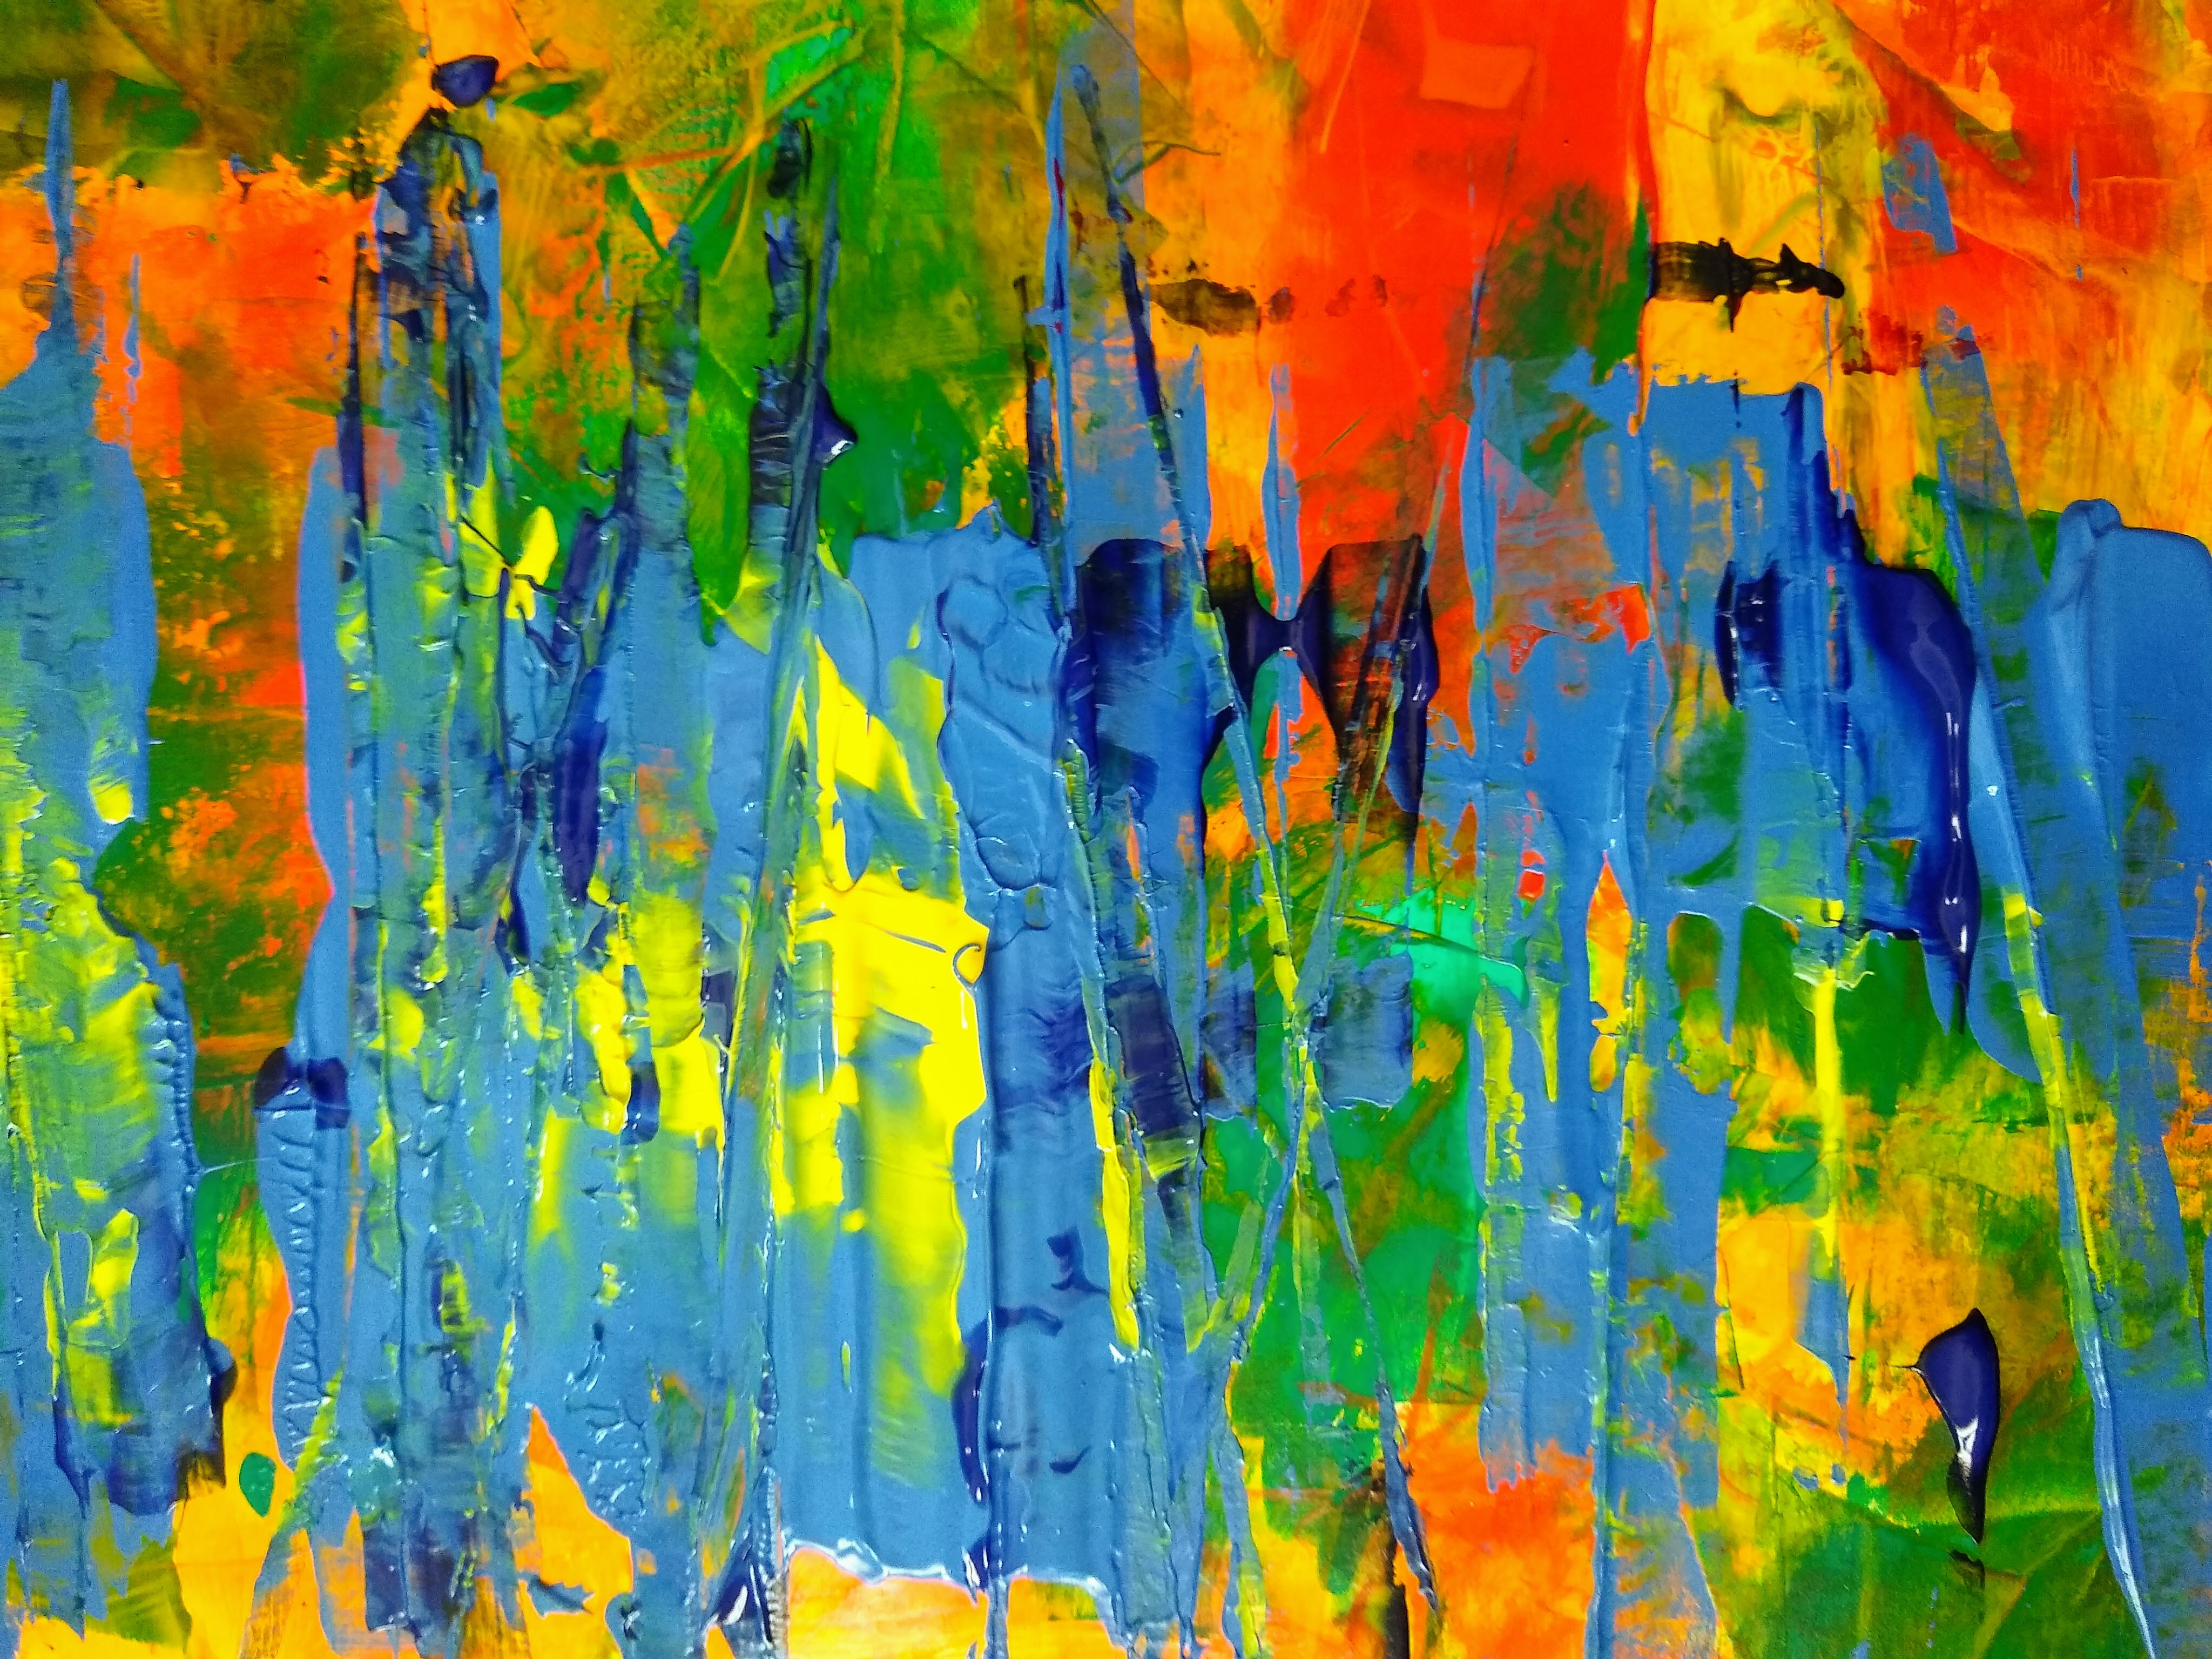 motley, abstract, art, multicolored, paint, canvas